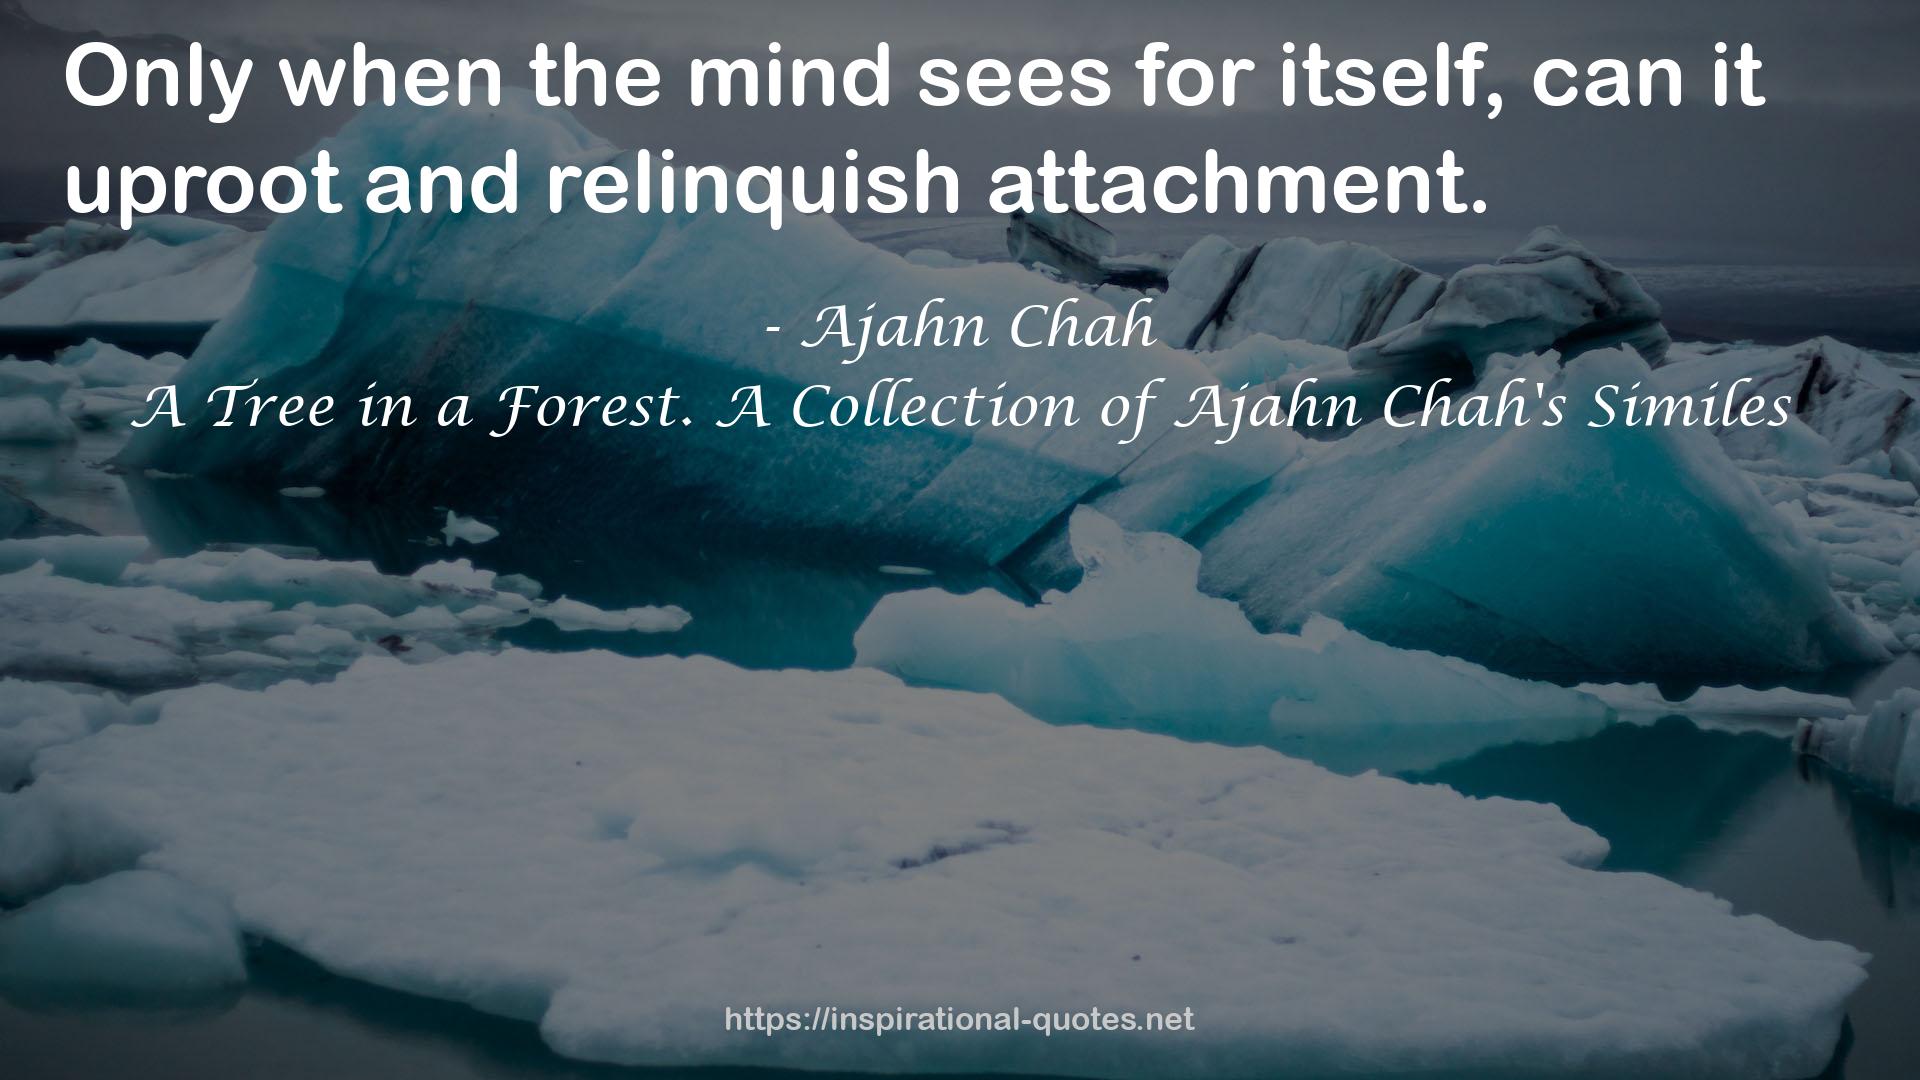 A Tree in a Forest. A Collection of Ajahn Chah's Similes QUOTES